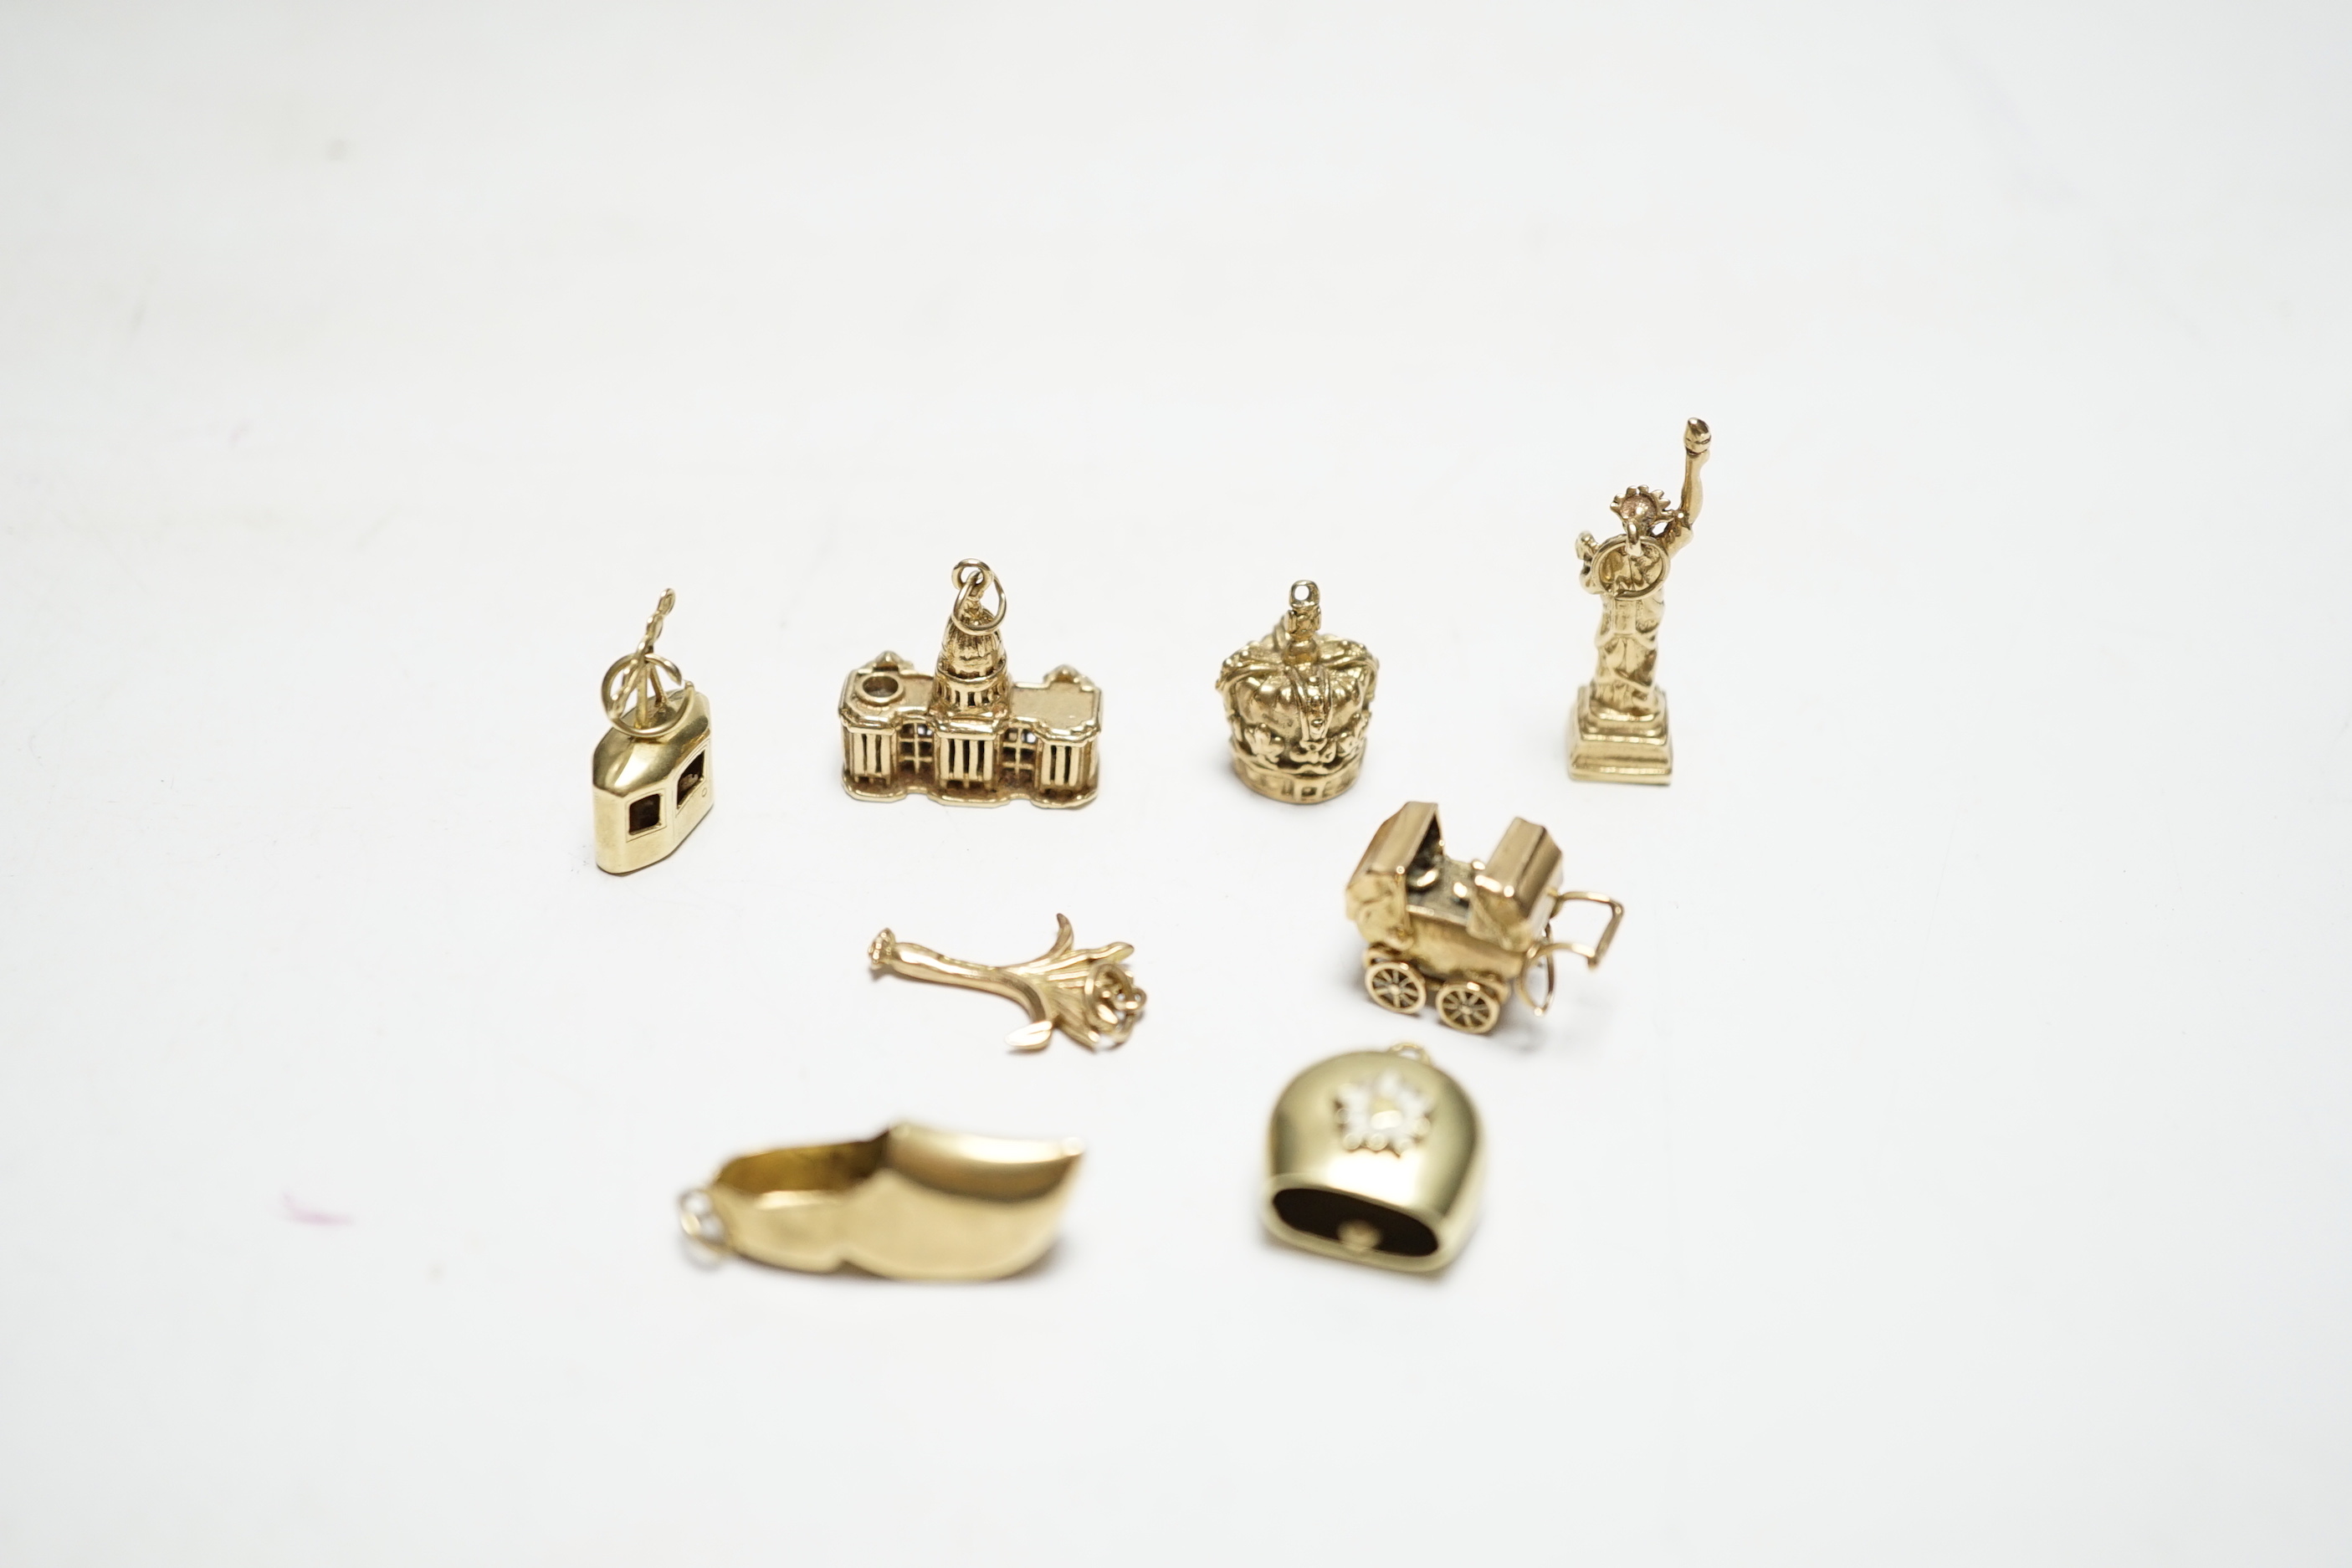 A 585 'Cable car' charm, 1.4 grams, three 9ct gold charms, 9.9 grams and four other yellow metal charms, one with enamel, gross weight 12.5 grams.